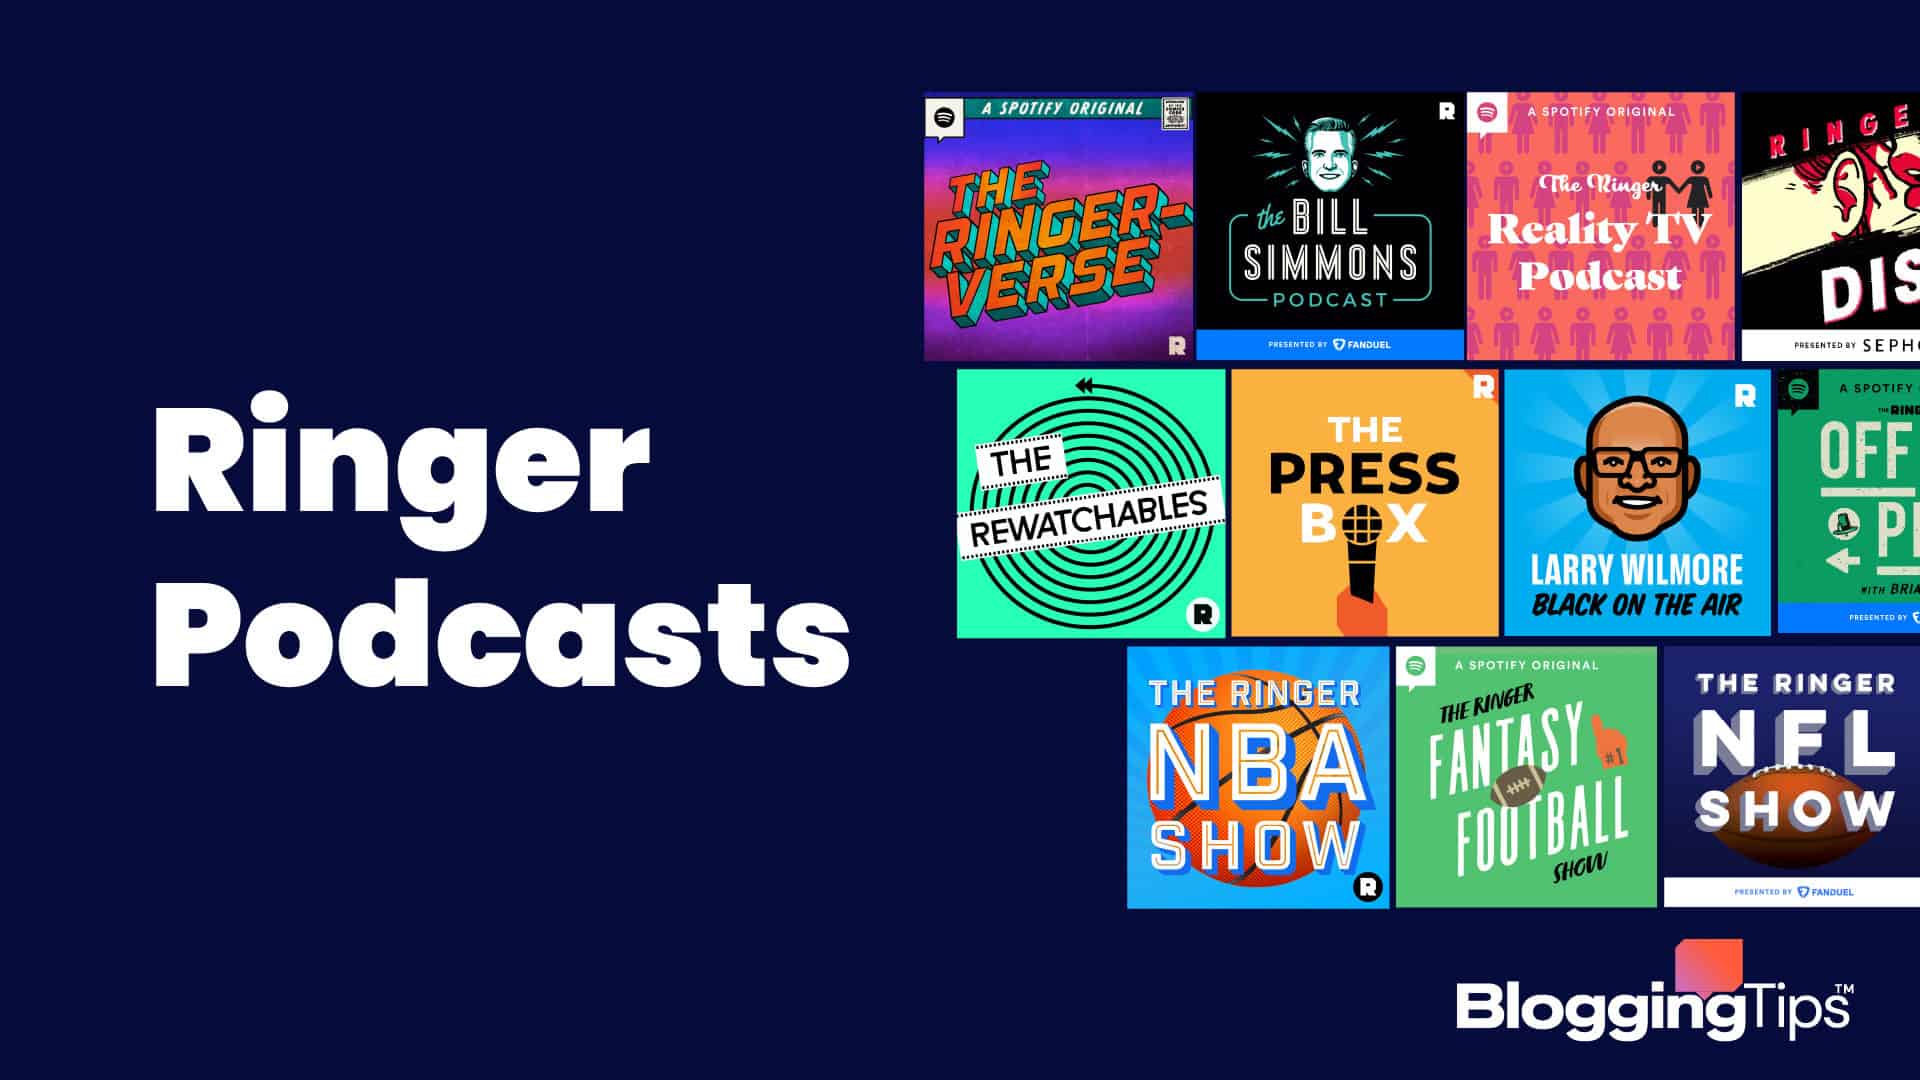 vector graphic showing an illustration of the best Ringer Podcasts logos with the big block text 